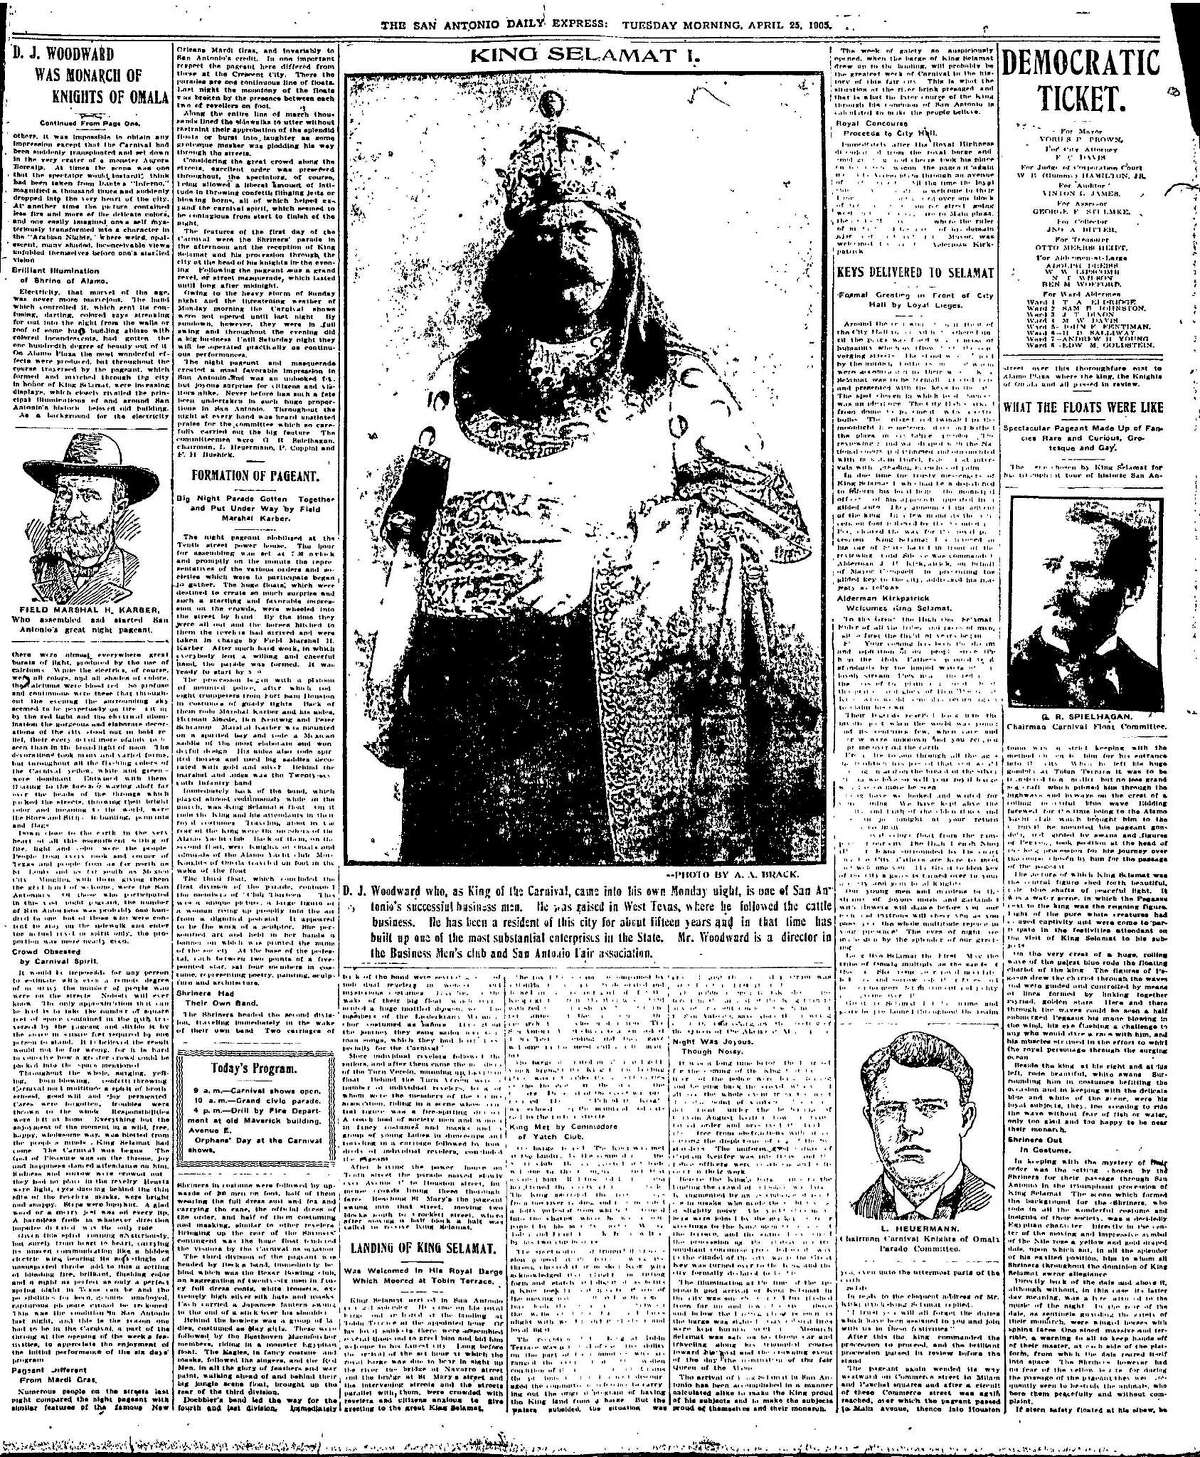 Jump page of April 25th, 1905 newspaper shows King Selamat (Tamales backwards) in full glory.